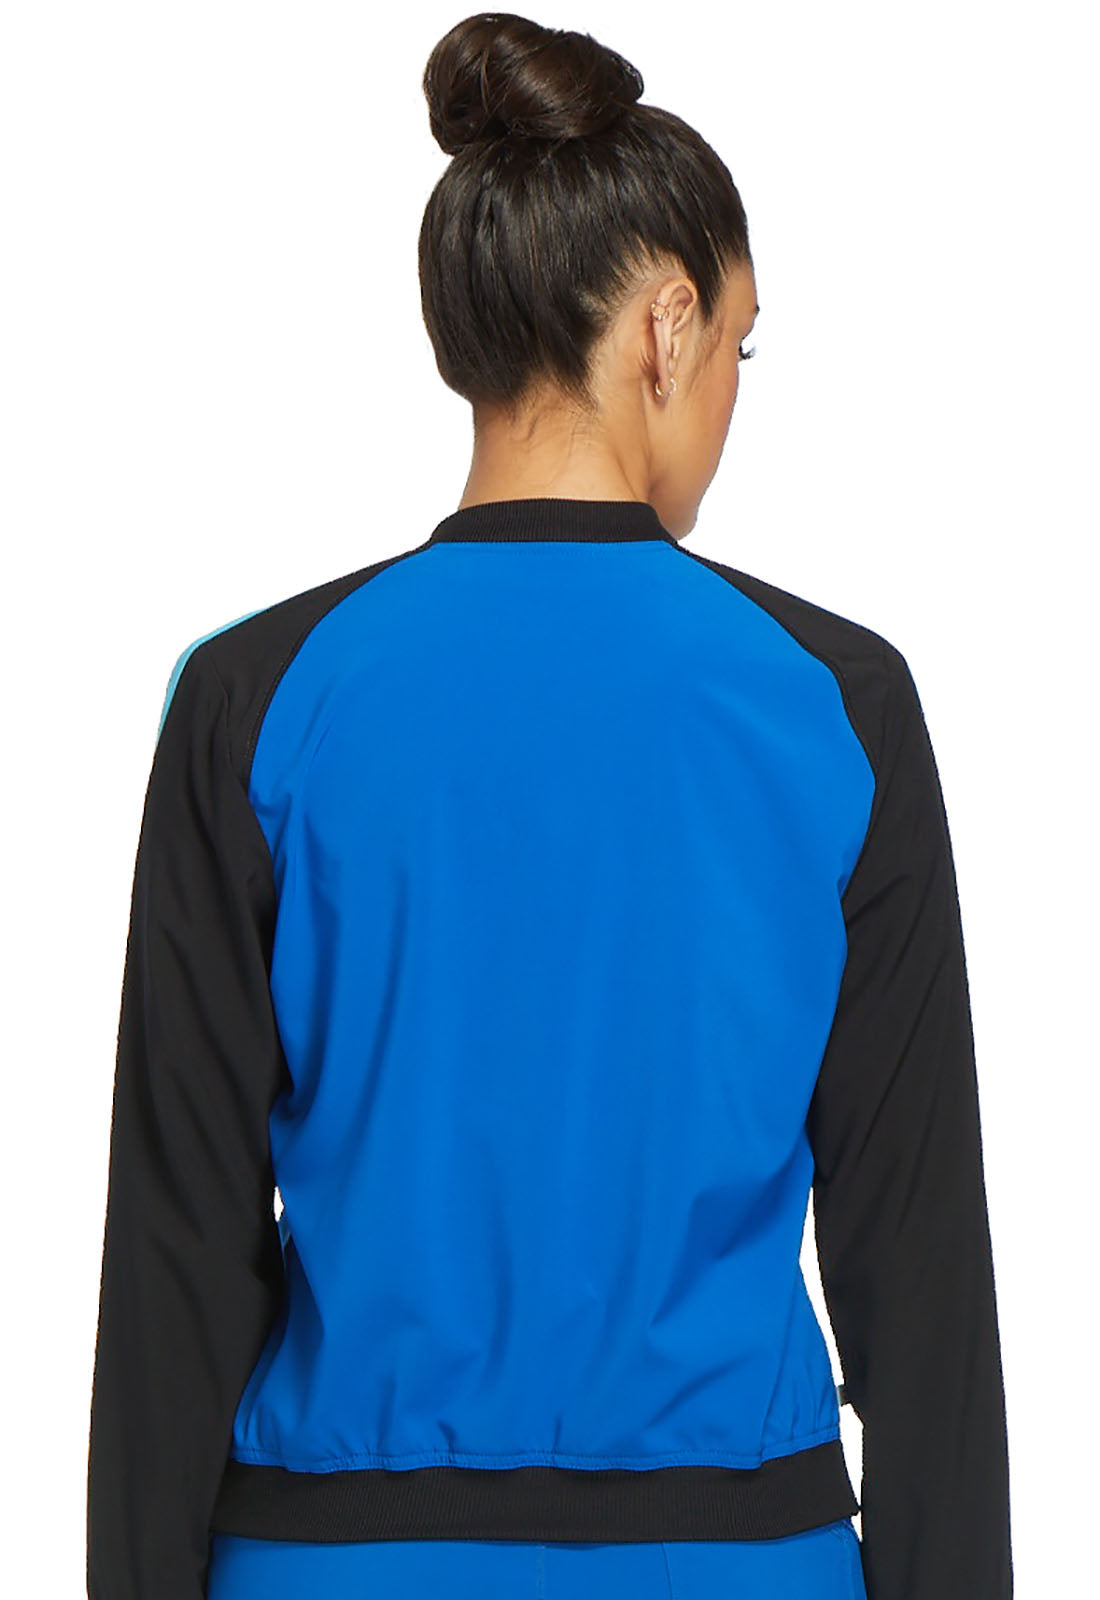 Zip Front Warm-up Jacket in Royal Infinity